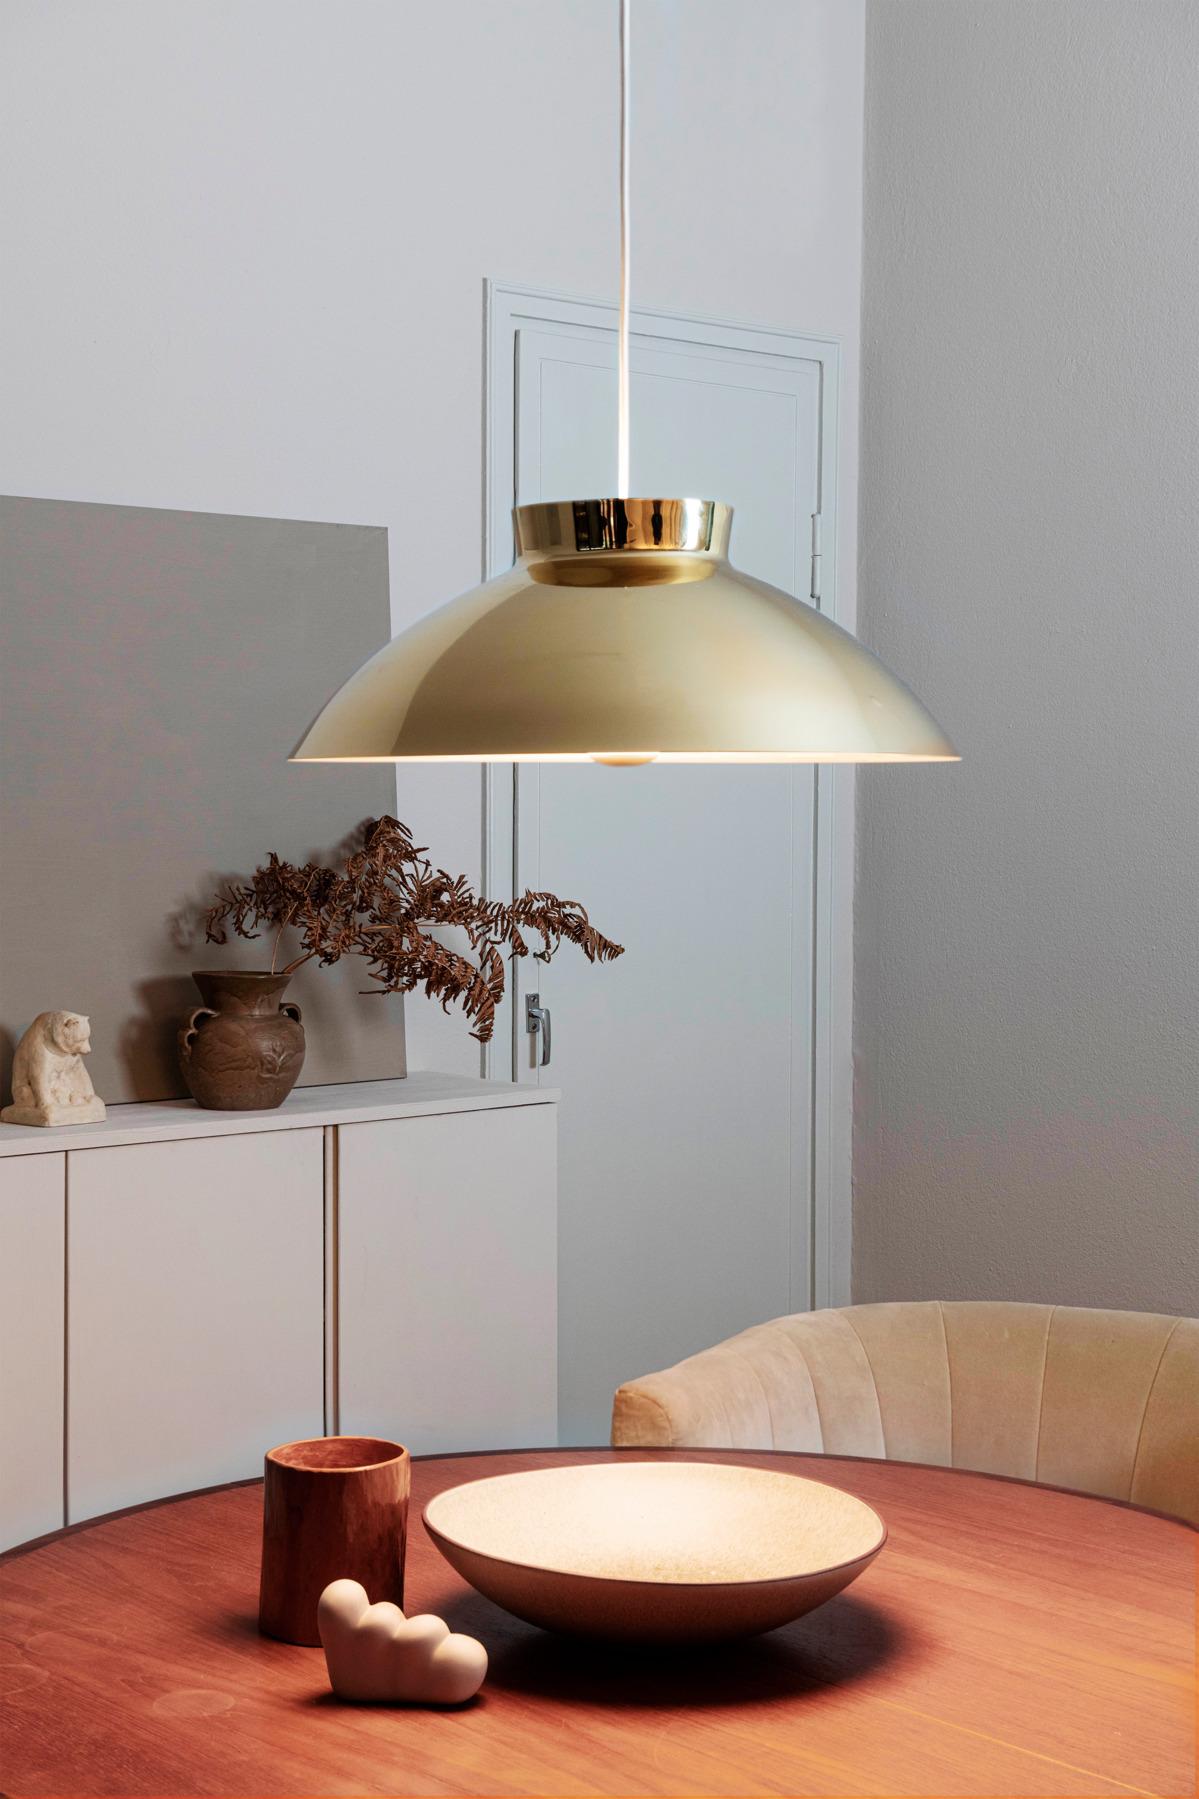 Lisa Johansson-Pape 'Sirri' pendant in brass for Innolux. Originally designed in the 1960s, these authorized re-editions by Innolux Oy of Finland are true to the original charming simplicity of Pape's iconic vision. The high-quality luminaire is